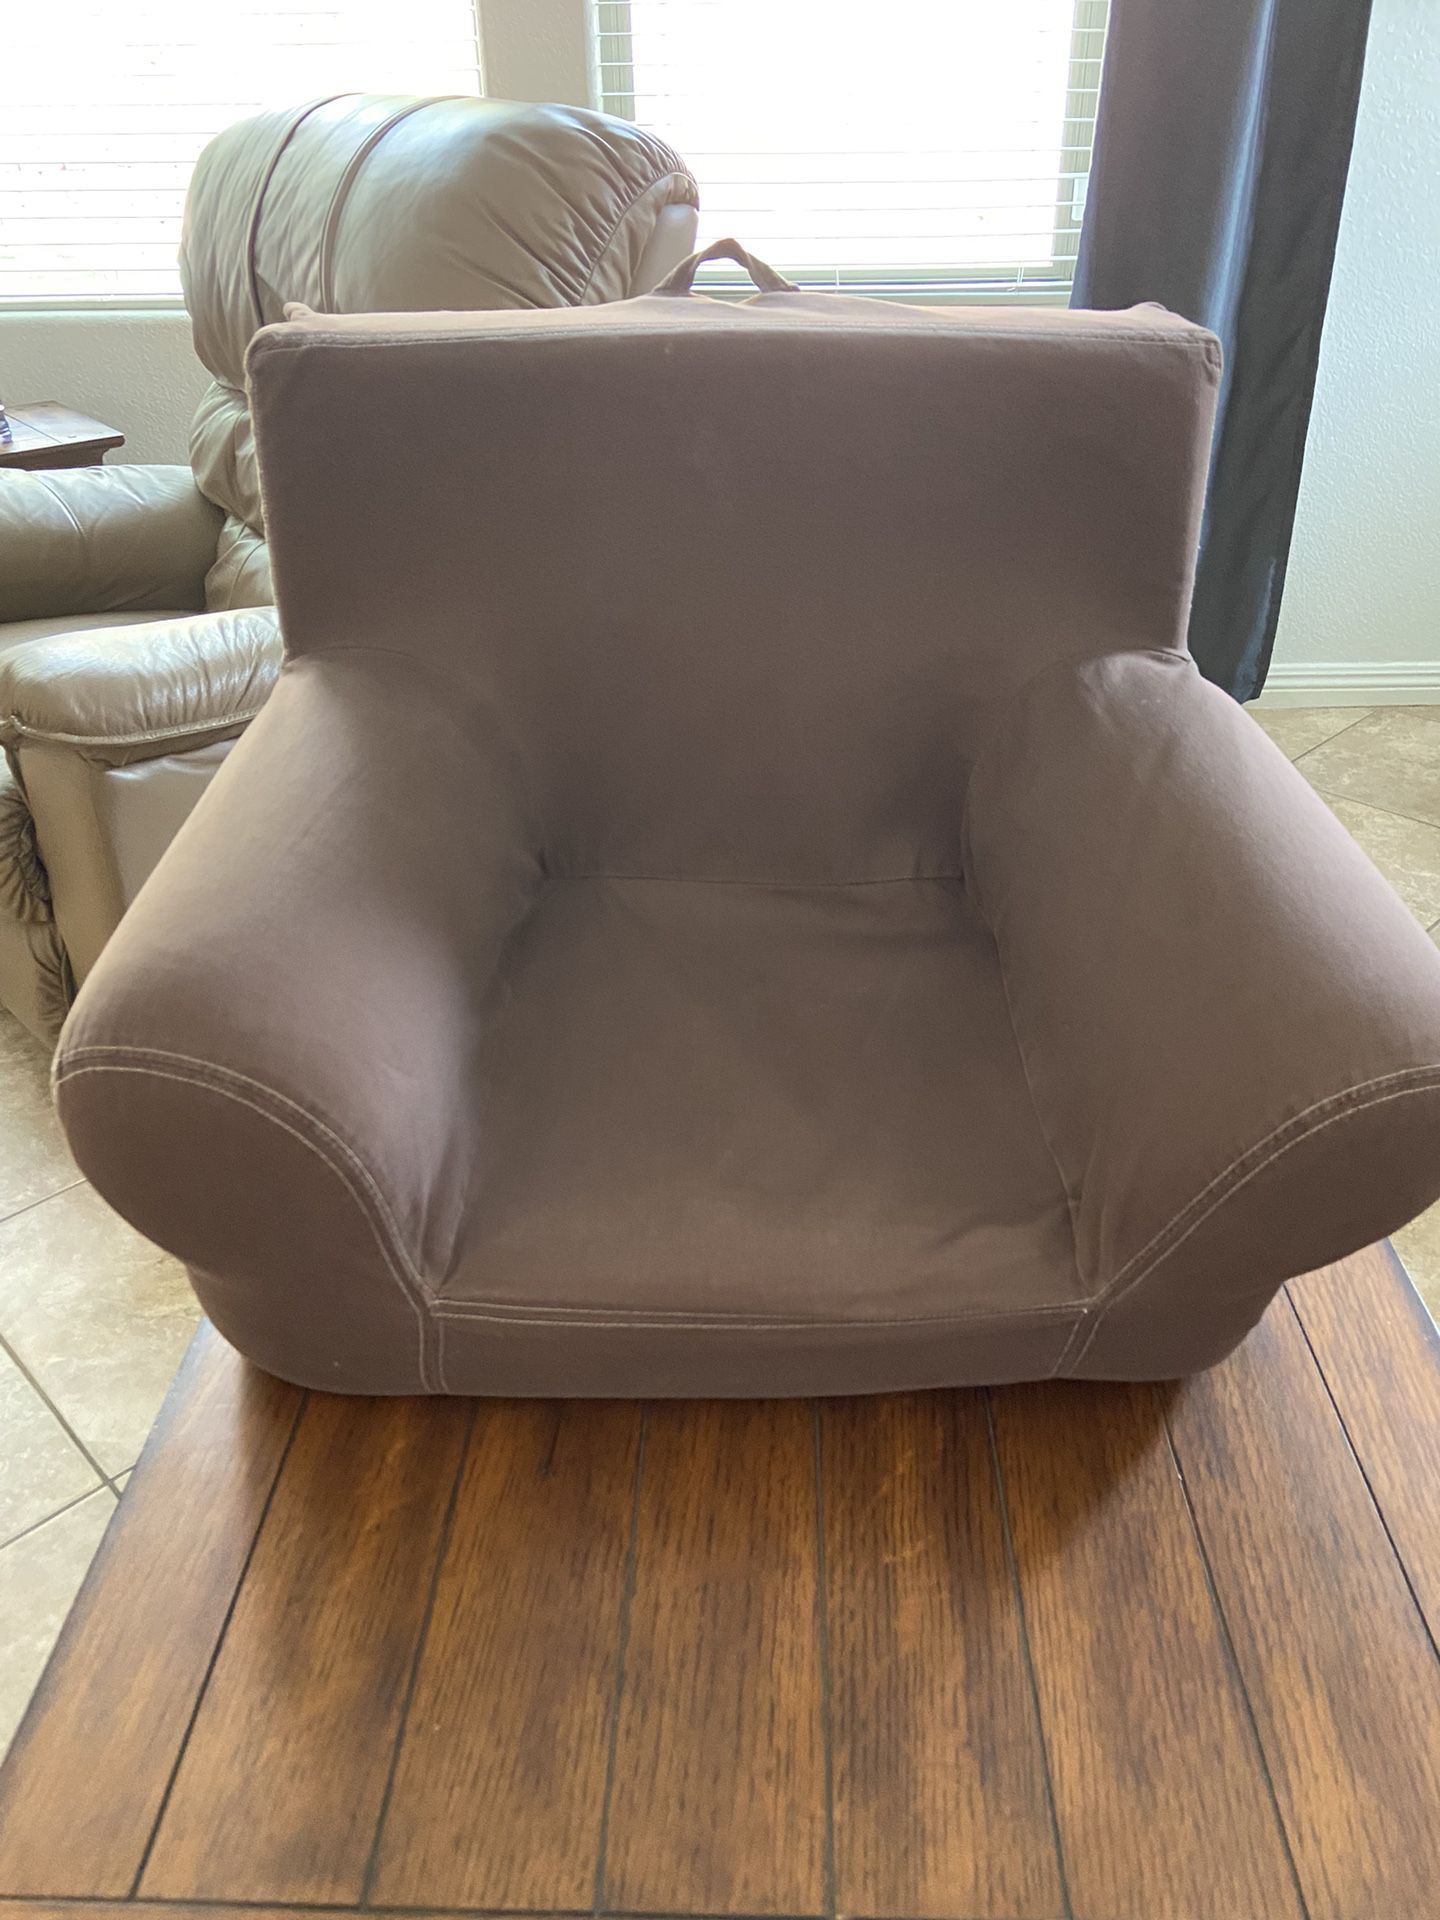 Brown Pottery Barn anywhere kid chair Tropicana town center area $30 My First Overall: 20.5" wide x 16.5" deep x 17.75" high Seat: 10" wide x 10.5" de